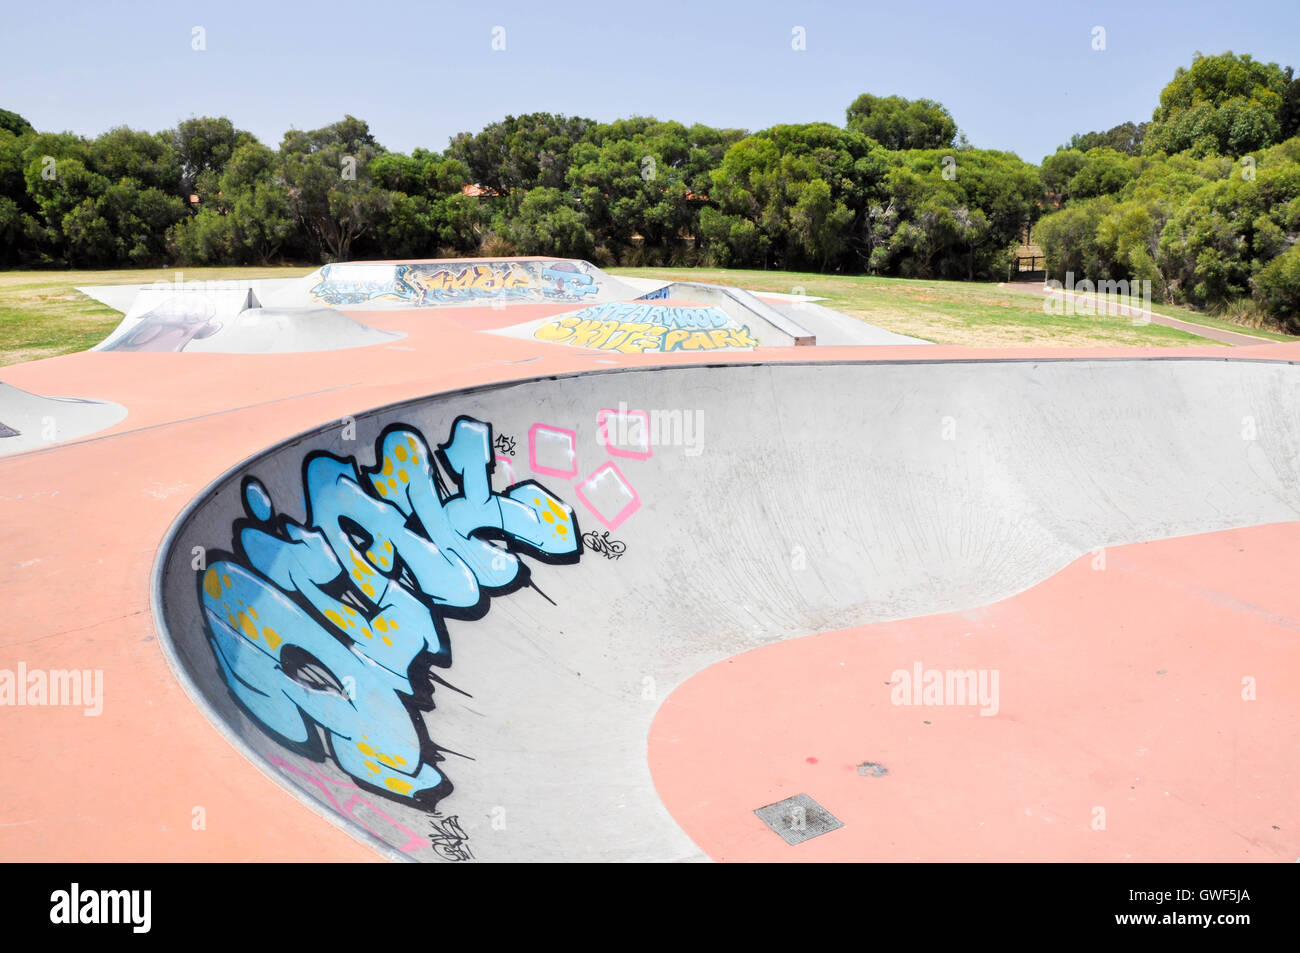 Spearwood Skate Park with concrete ramps and urban art in the treed setting  under a blue sky in Spearwood, Western Australia Stock Photo - Alamy